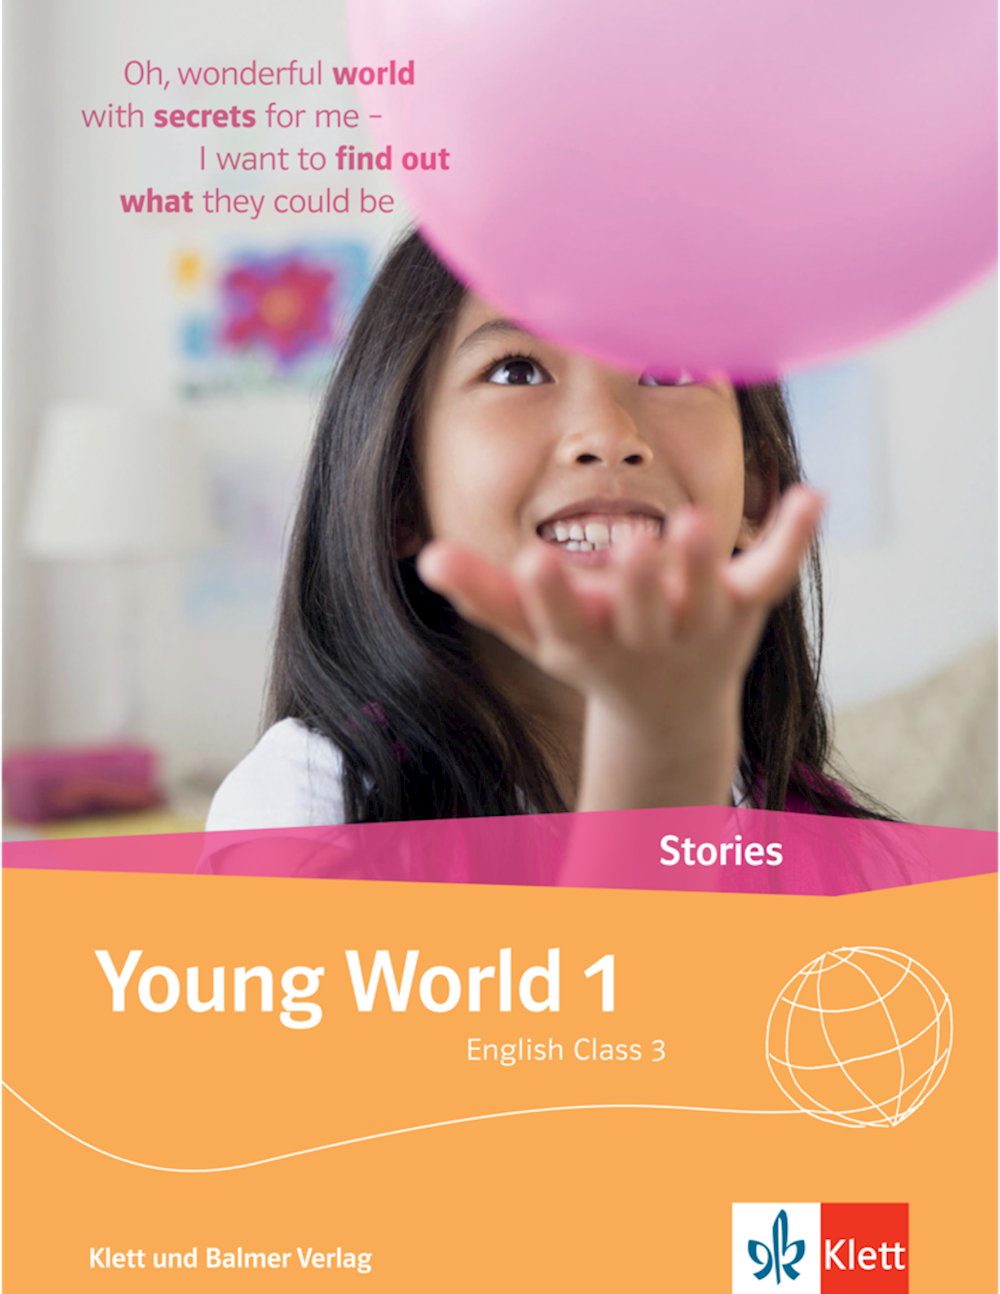 Young World 1 Stories 10er-Paket